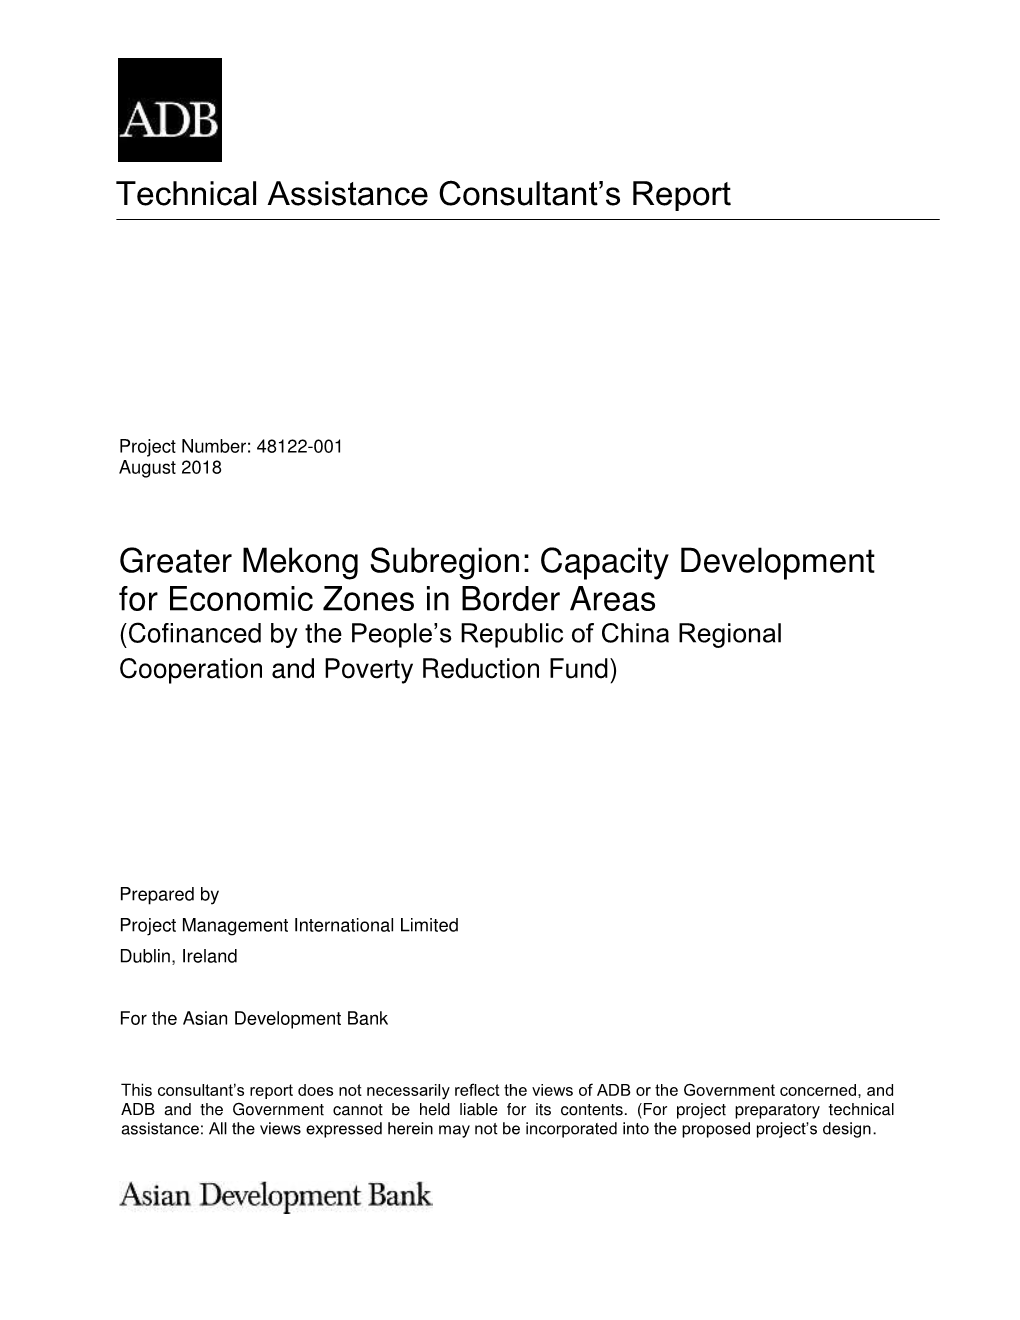 Capacity Development for Economic Zones in Border Areas (Cofinanced by the People’S Republic of China Regional Cooperation and Poverty Reduction Fund)